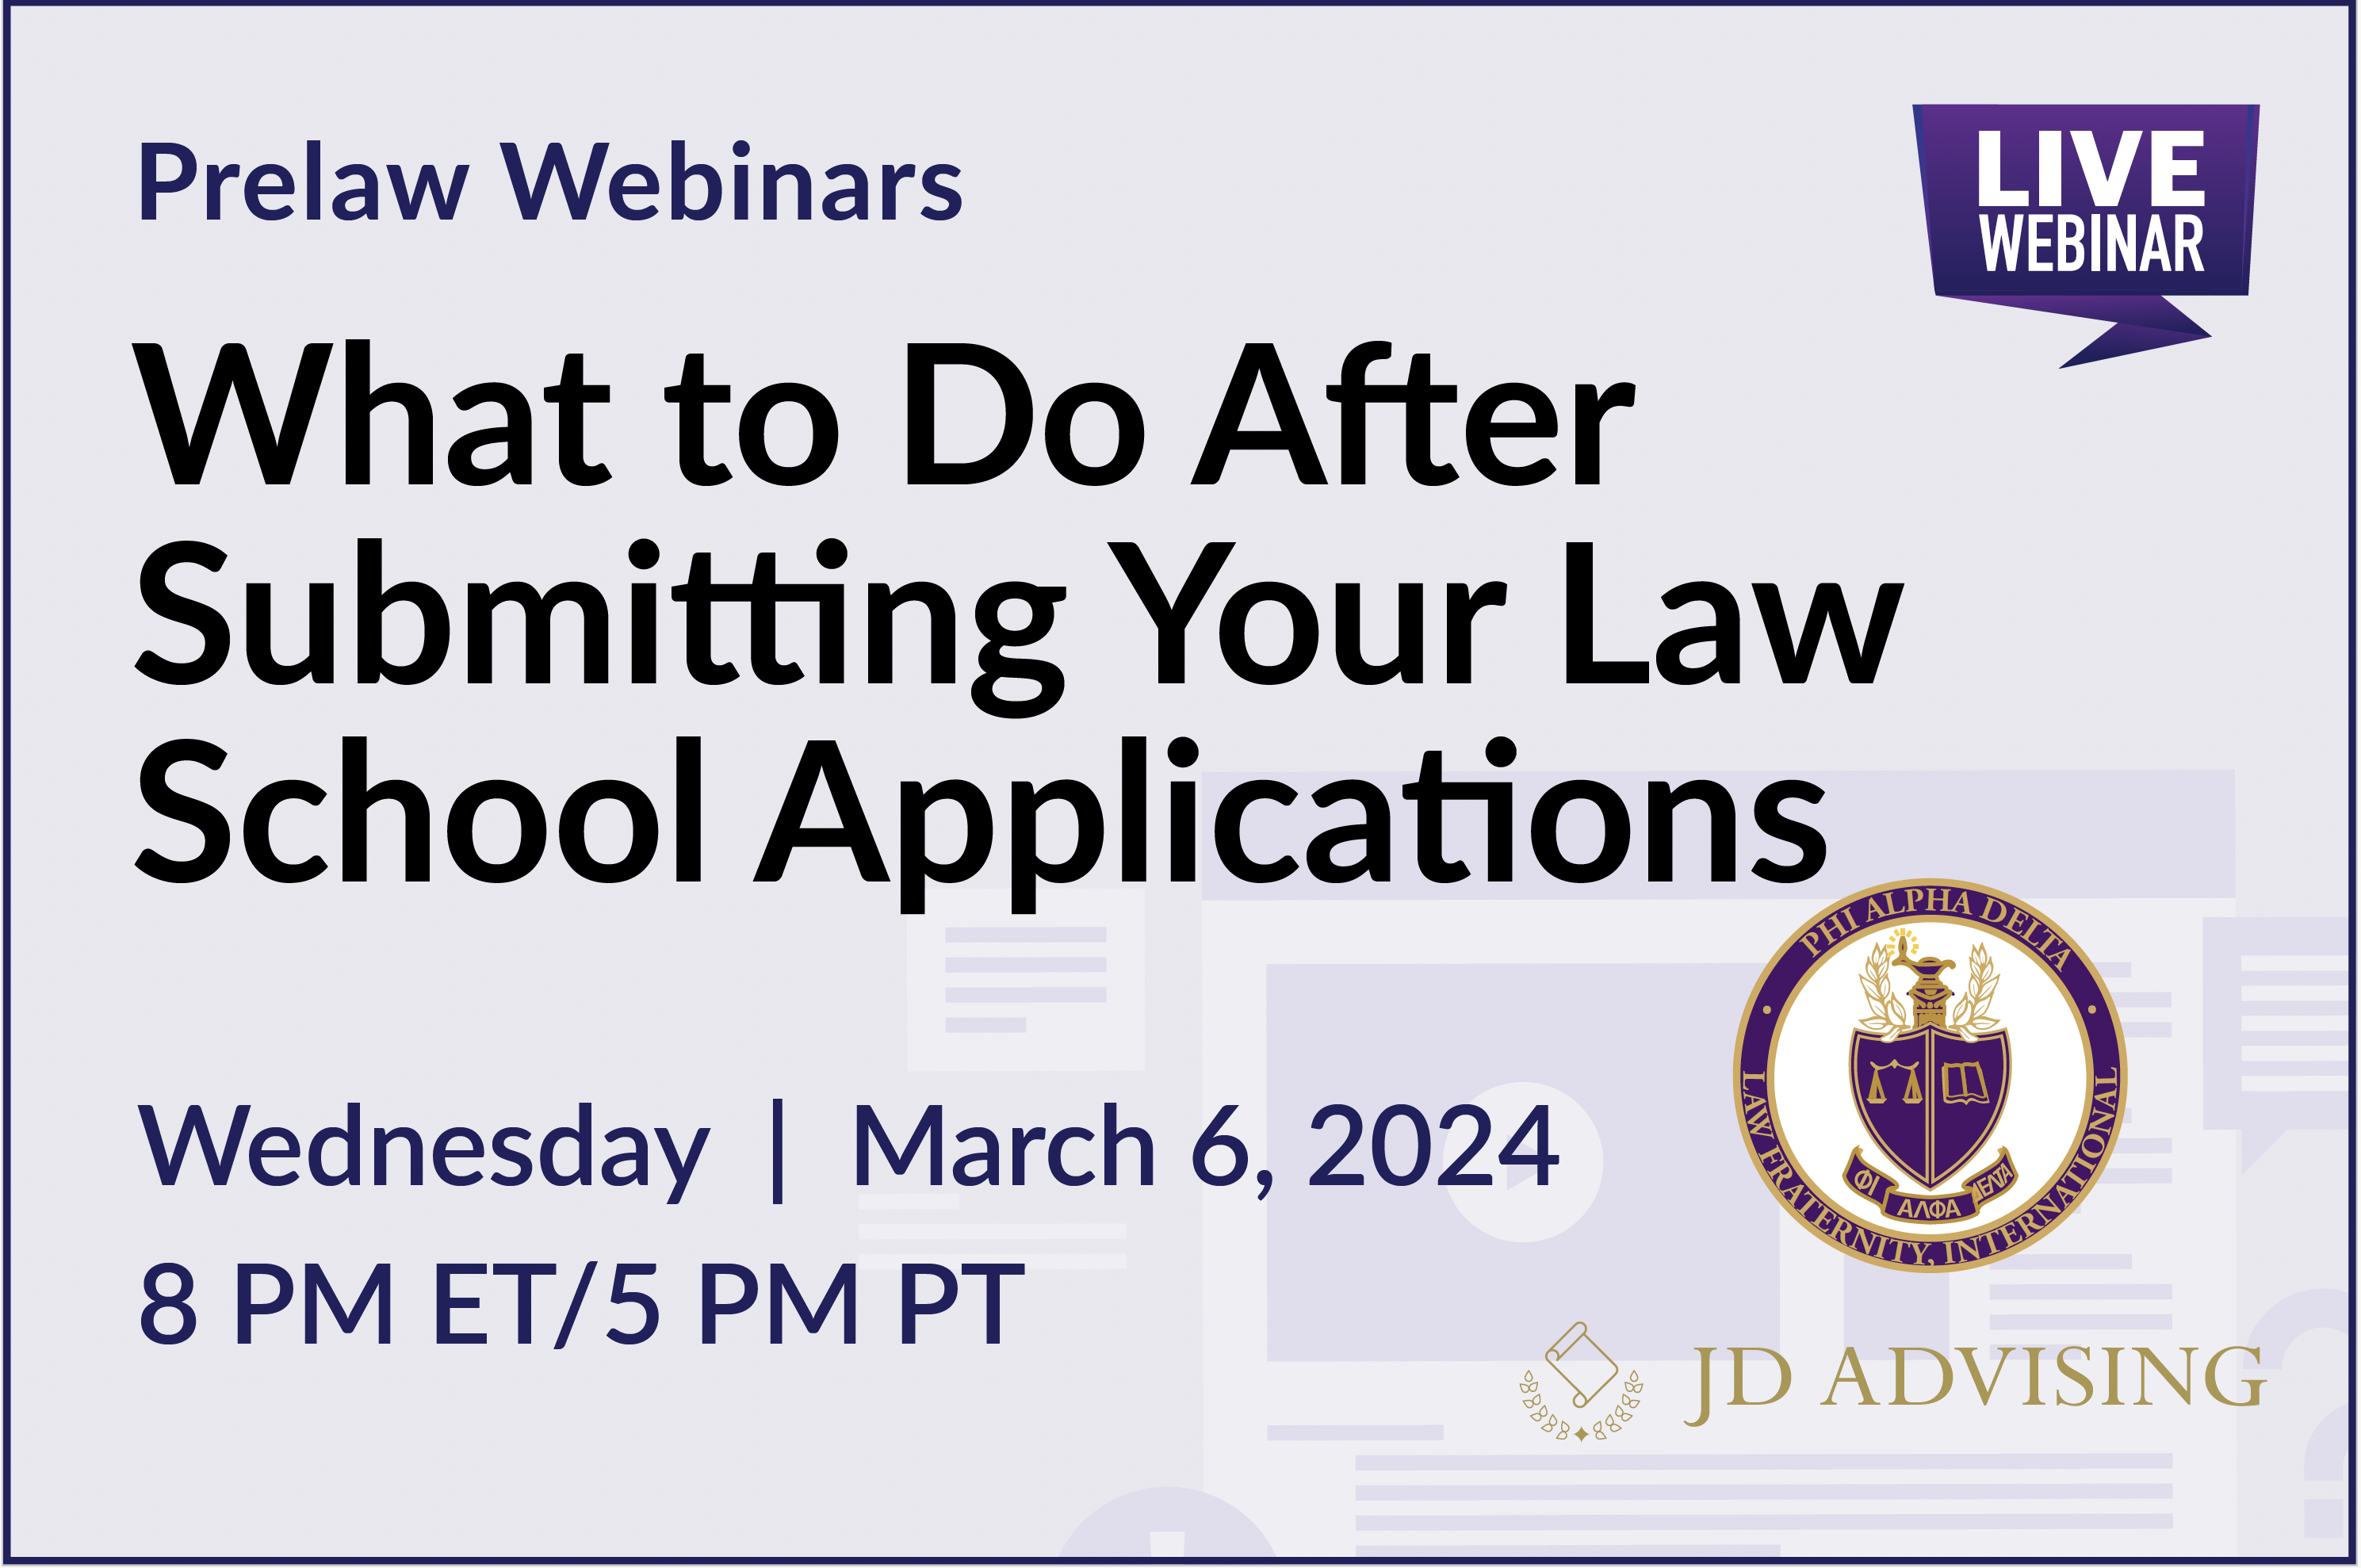 What to Do After Submitting Your Law School Applications